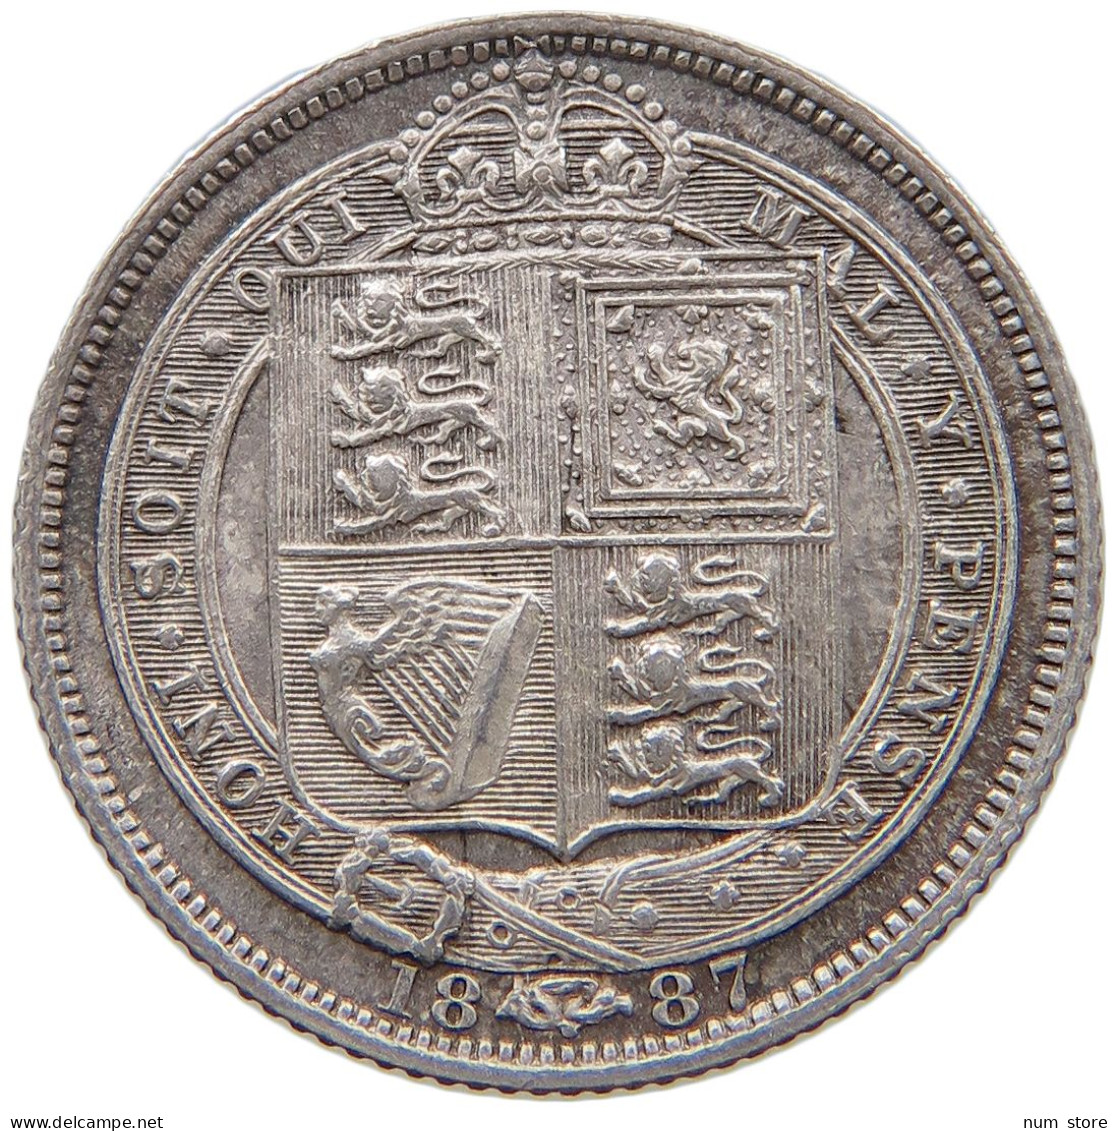 GREAT BRITAIN SIXPENCE 1887 Victoria 1837-1901 #t158 0391 - H. 6 Pence